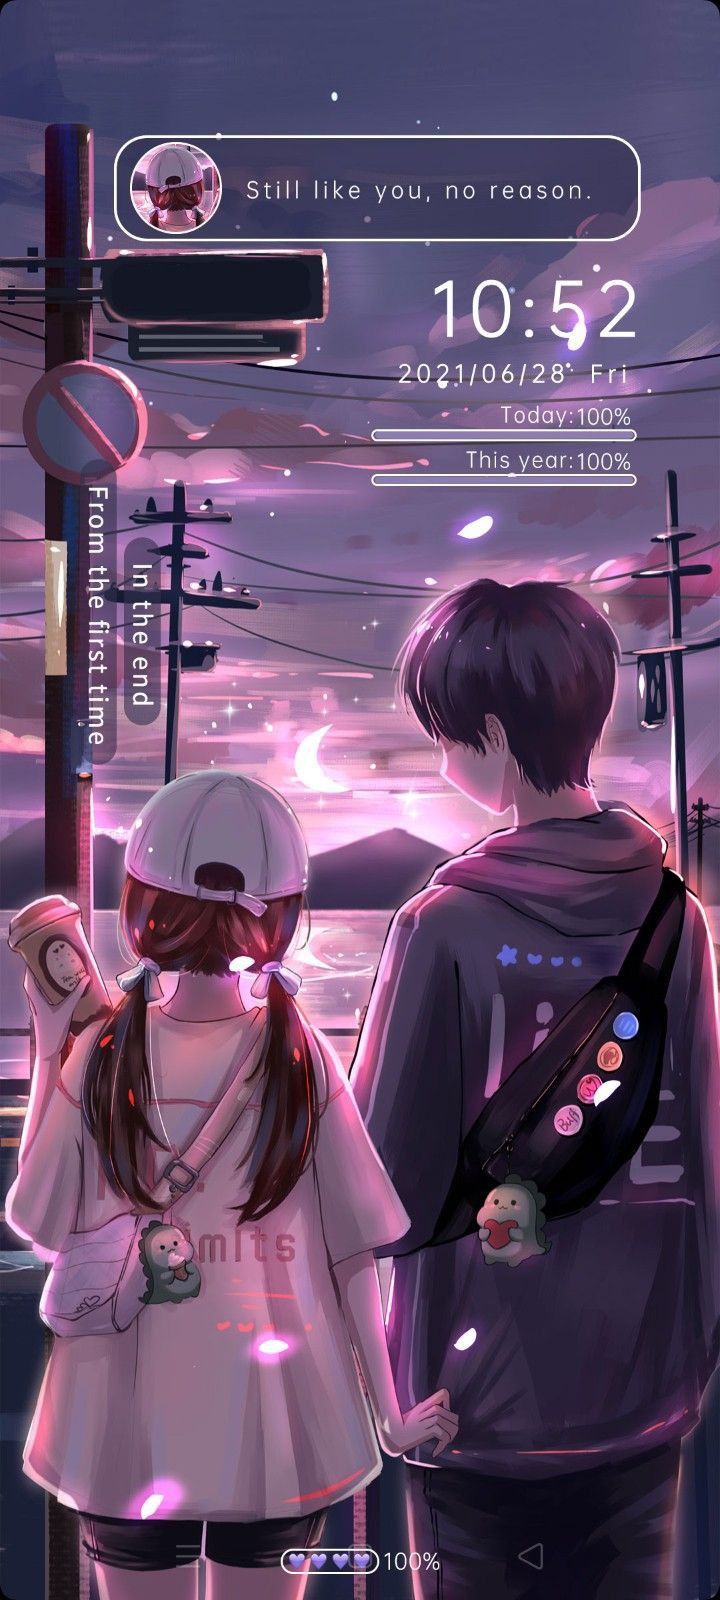 Aesthetic anime wallpaper with a boy and a girl standing in a field - Anime, anime girl